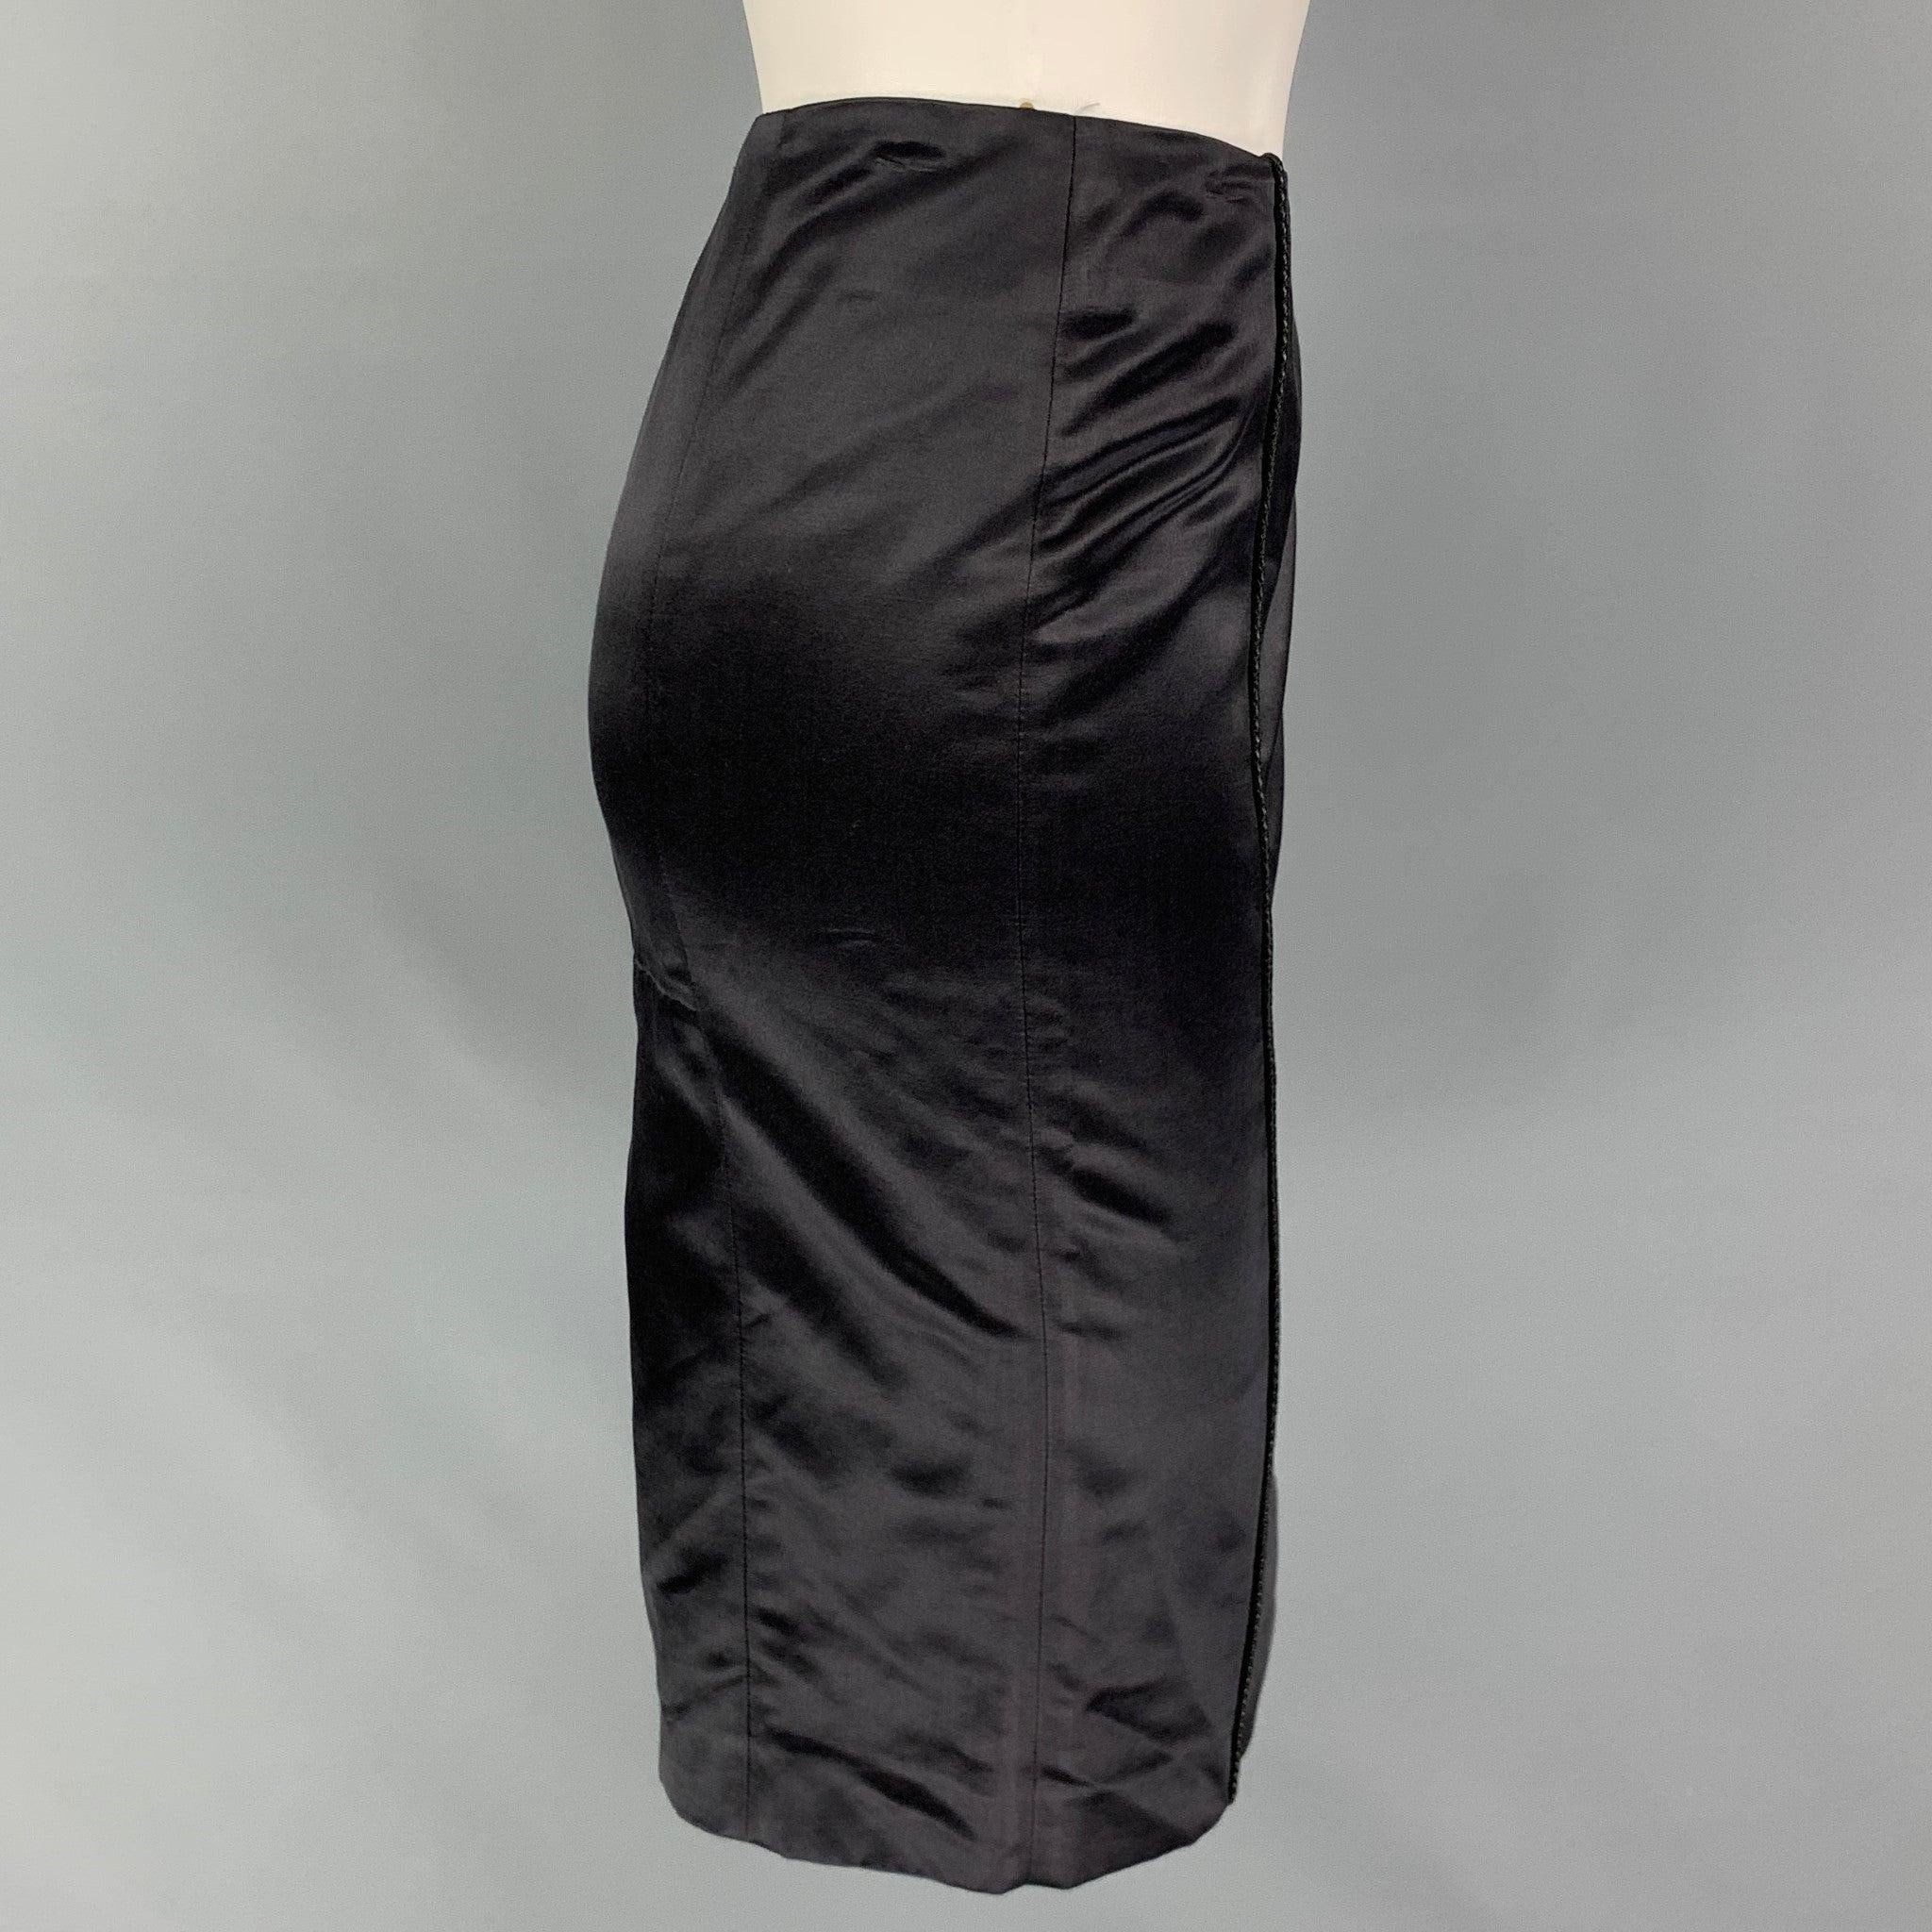 BOTTEGA VENETA skirt comes in a black cotton / silk featuring a pencil style, leather woven detail, and a back zipper closure. Made in Italy.
Very Good
Pre-Owned Condition. 

Marked:   40 

Measurements: 
  Waist: 26 inches  Hip:
32 inches  Length: